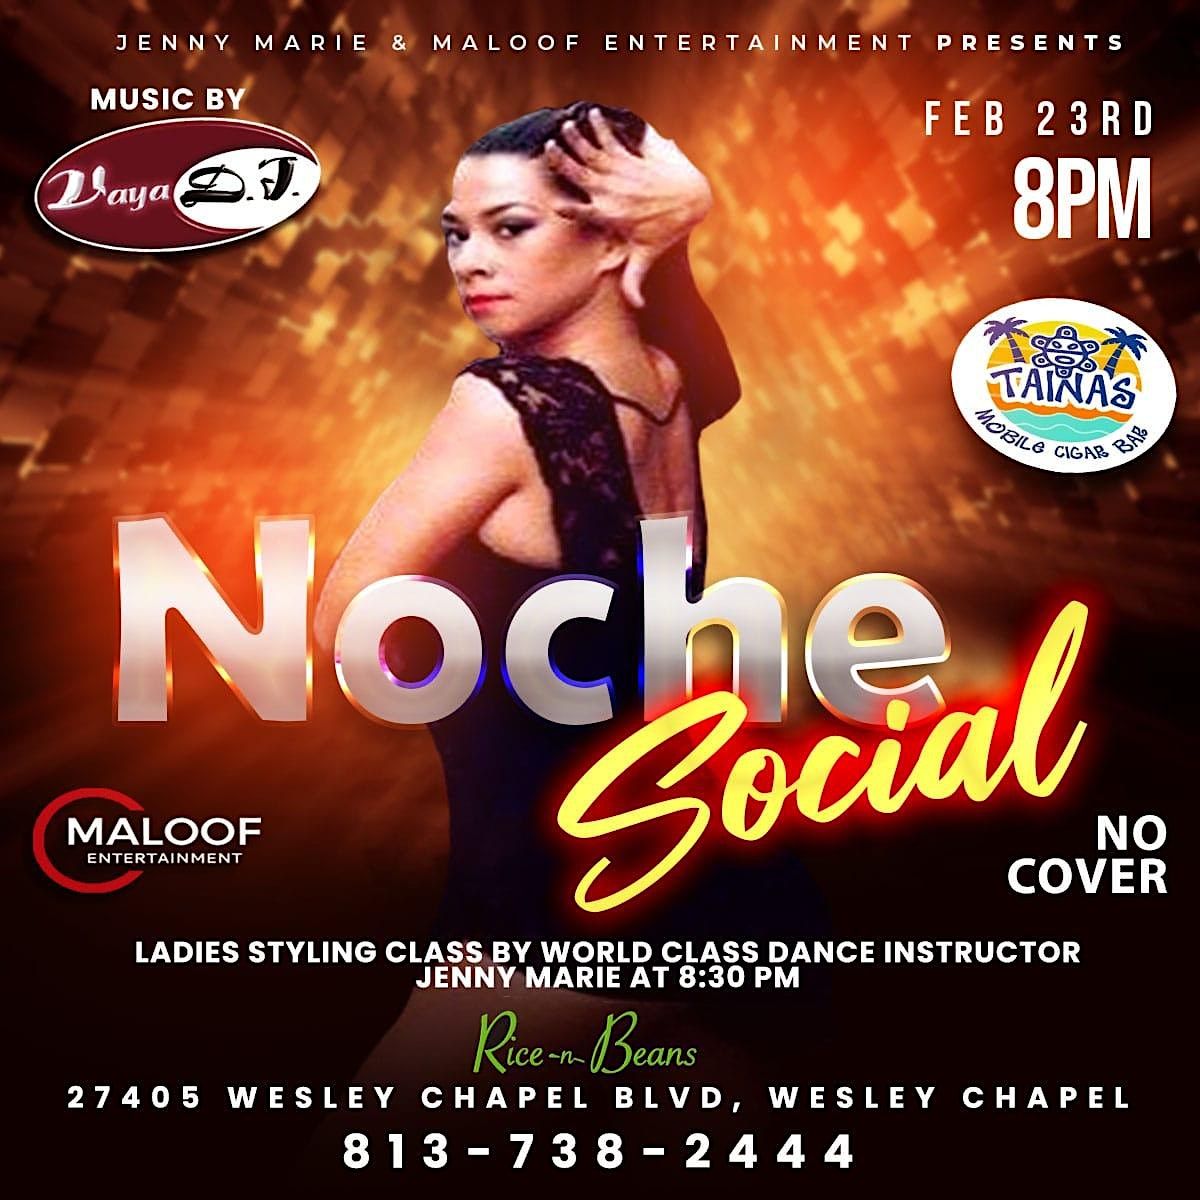 NOCHE SOCIAL @ RICE N BEANS WESLEY CHAPEL - FREE EVENT!